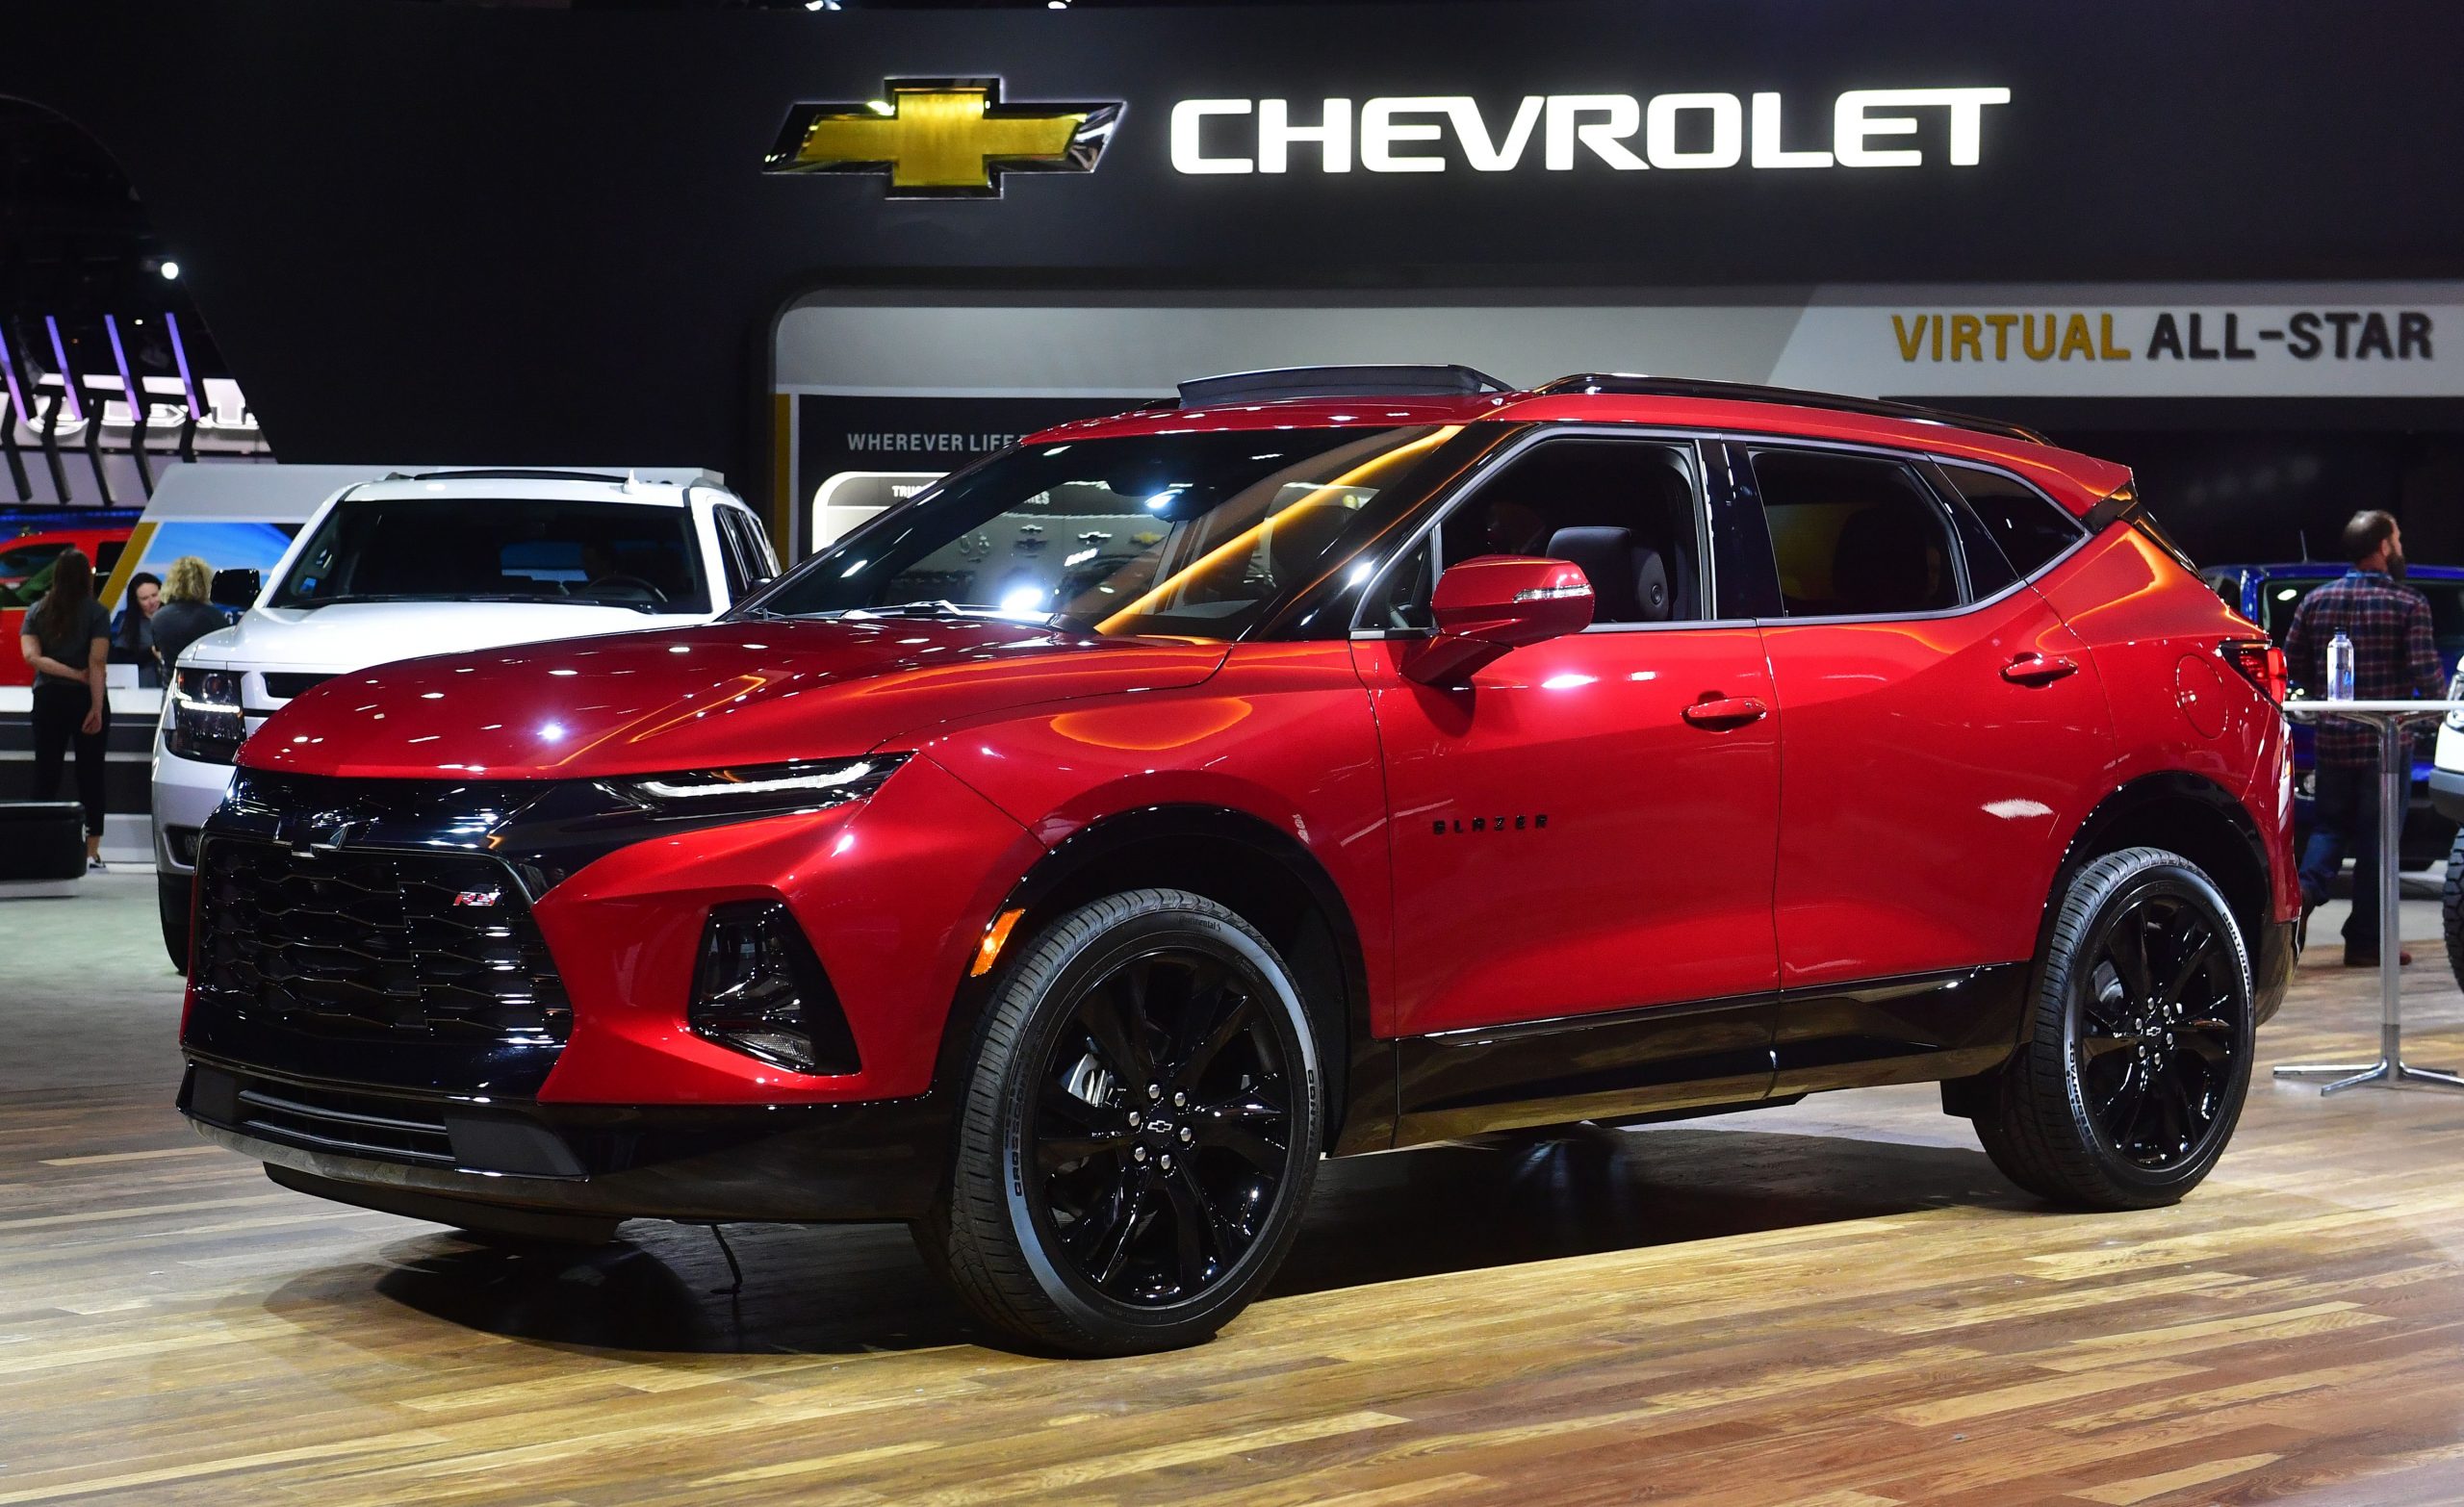 a red Chevy Blazer on display at an auto show